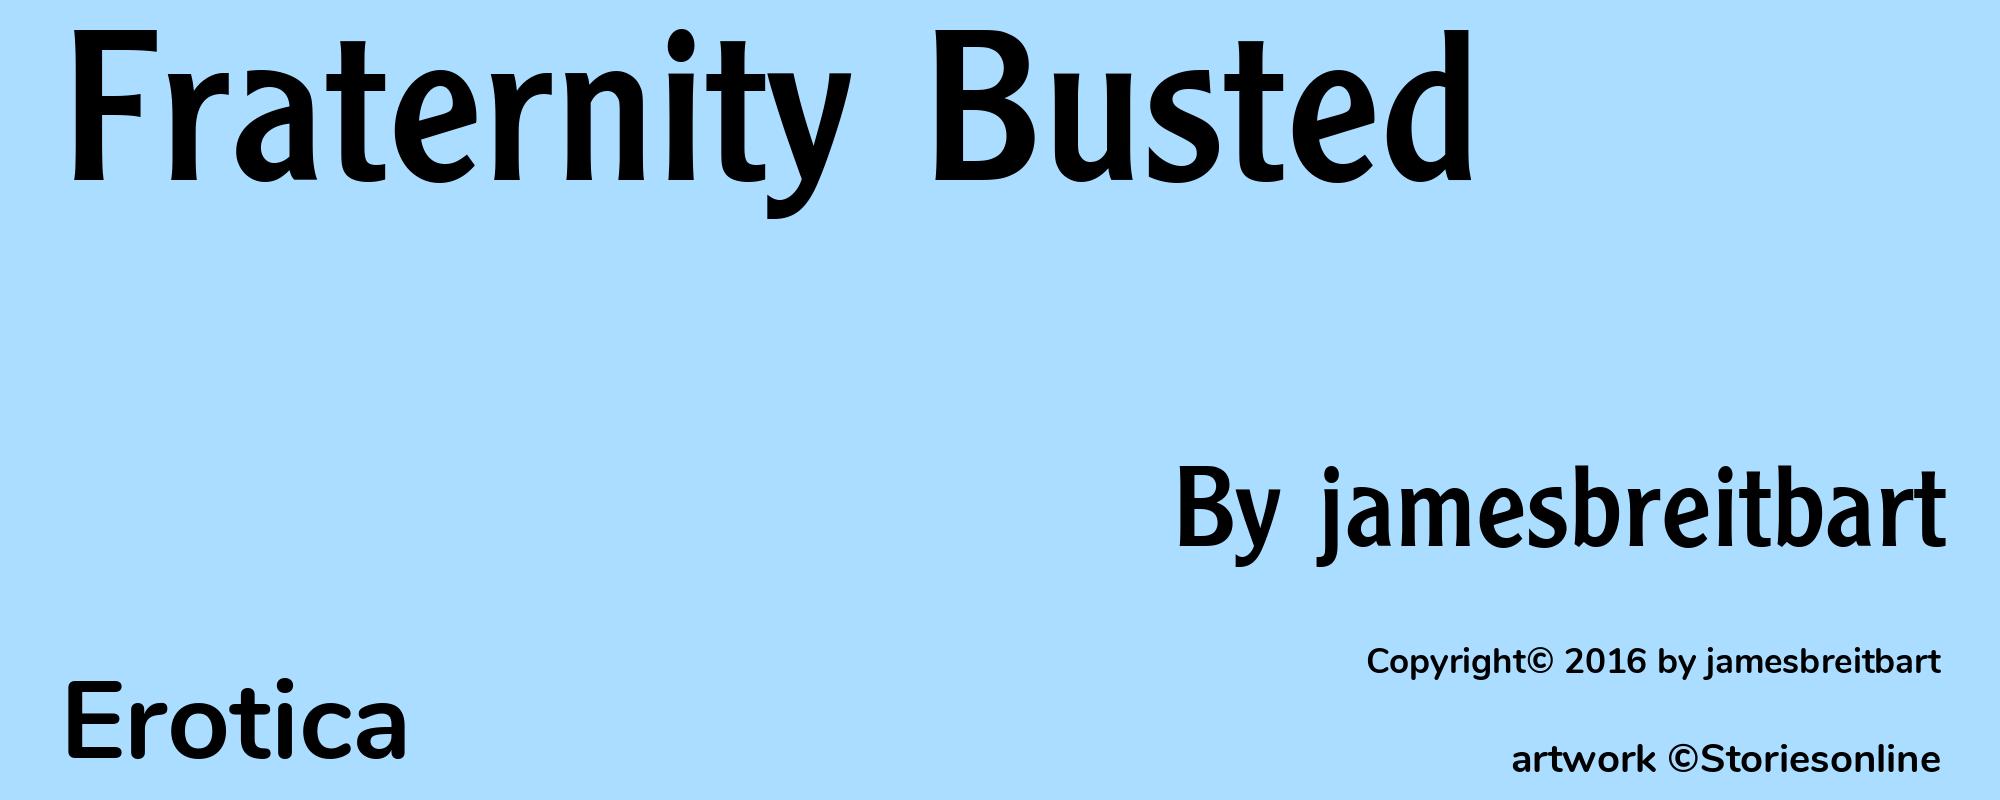 Fraternity Busted - Cover